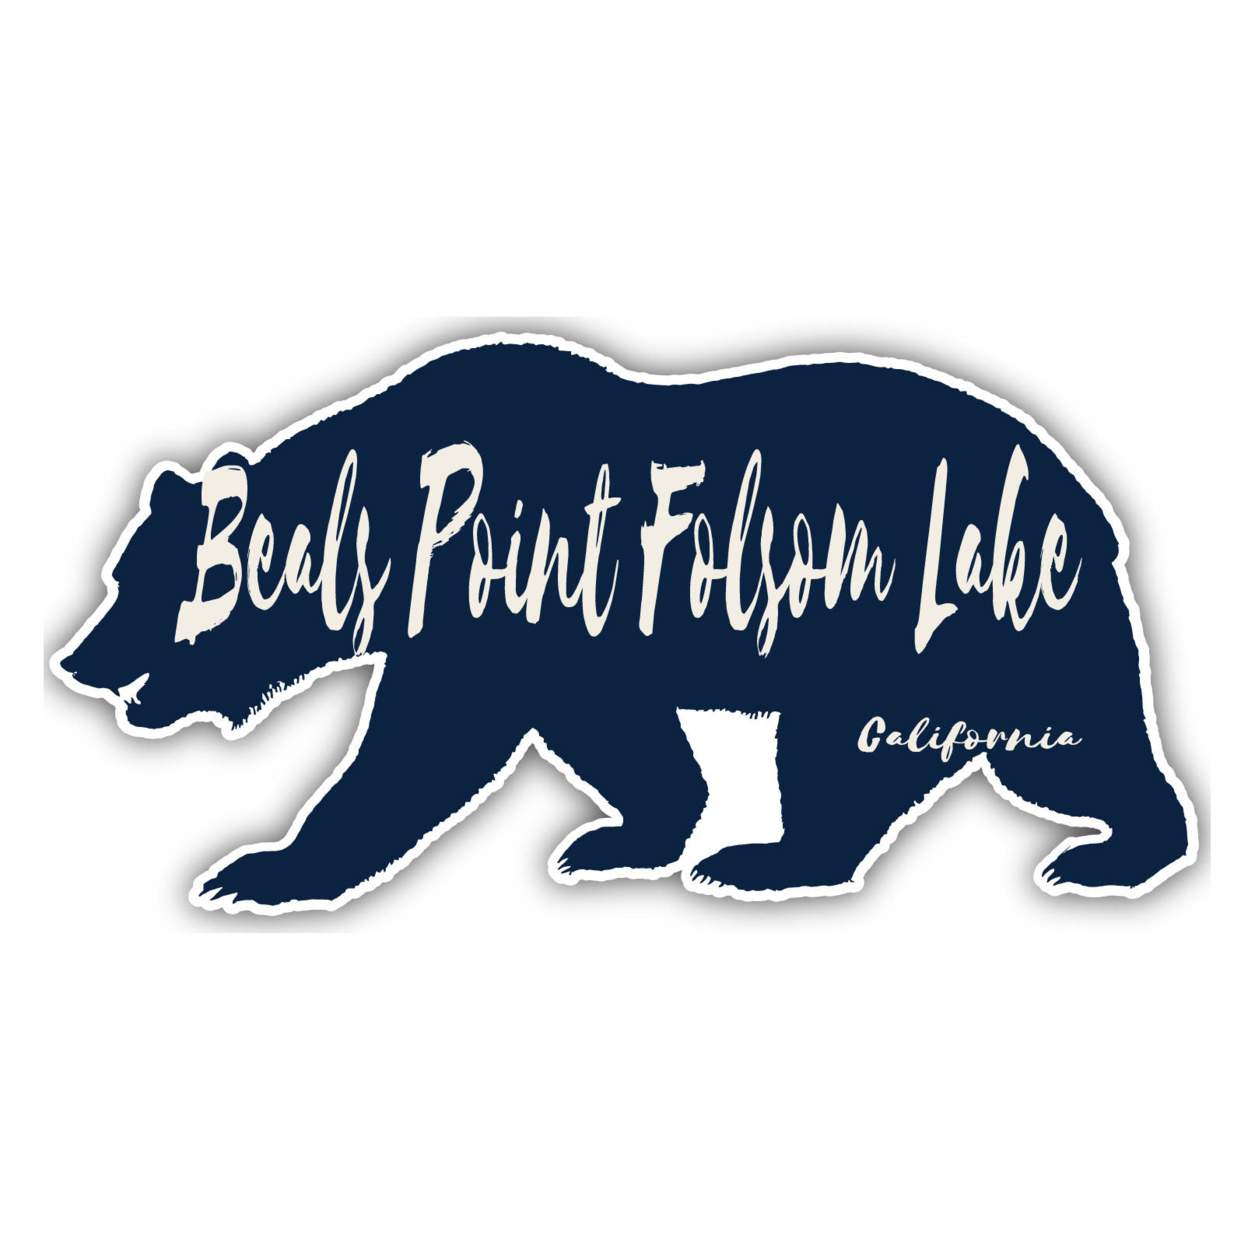 Beals Point Folsom Lake California Souvenir Decorative Stickers (Choose Theme And Size) - Single Unit, 6-Inch, Camp Life